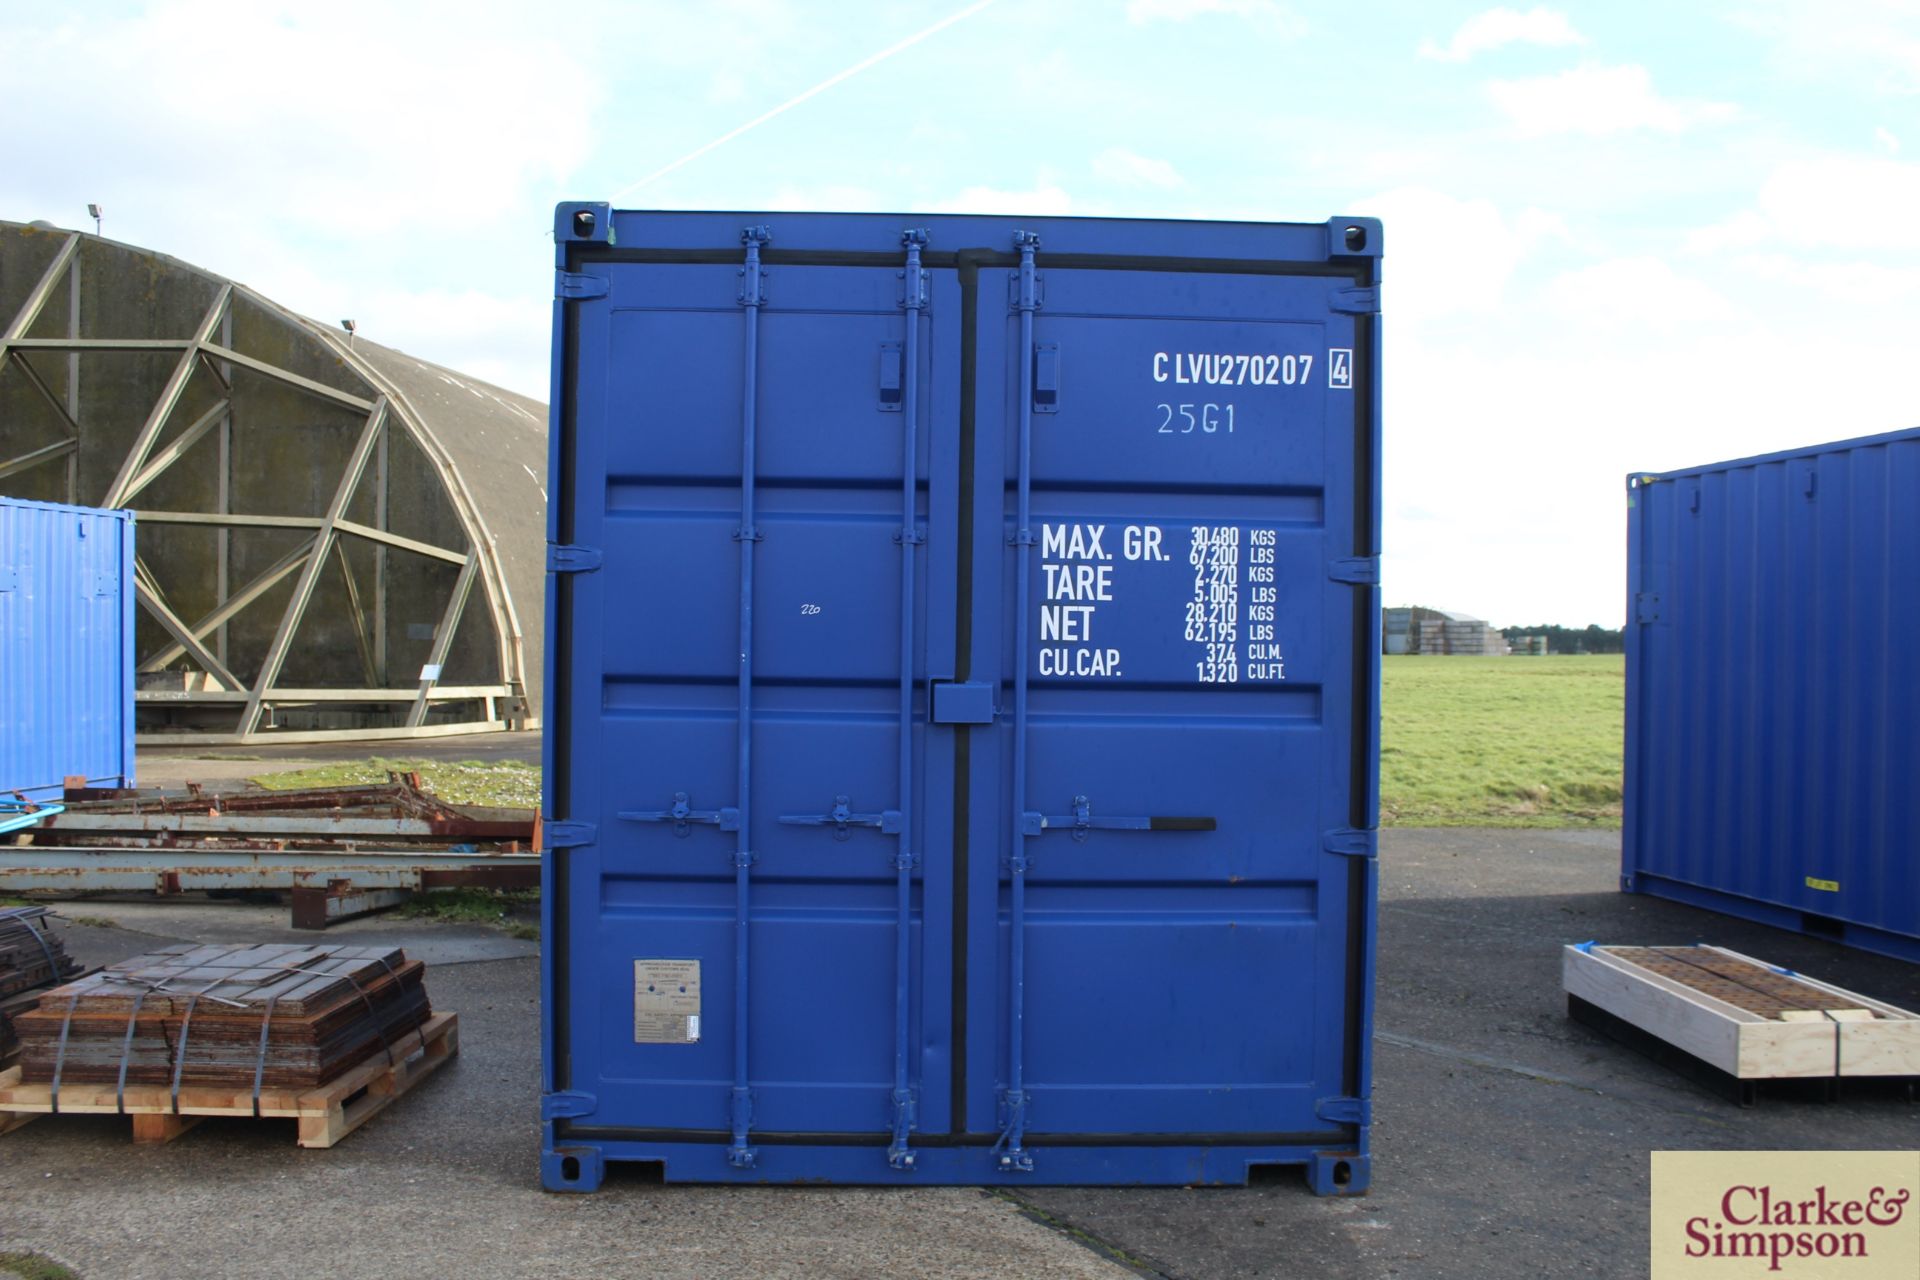 20ft x 9ft6in high shipping container. 2019. Partially reinforced to interior to include plates - Image 2 of 19